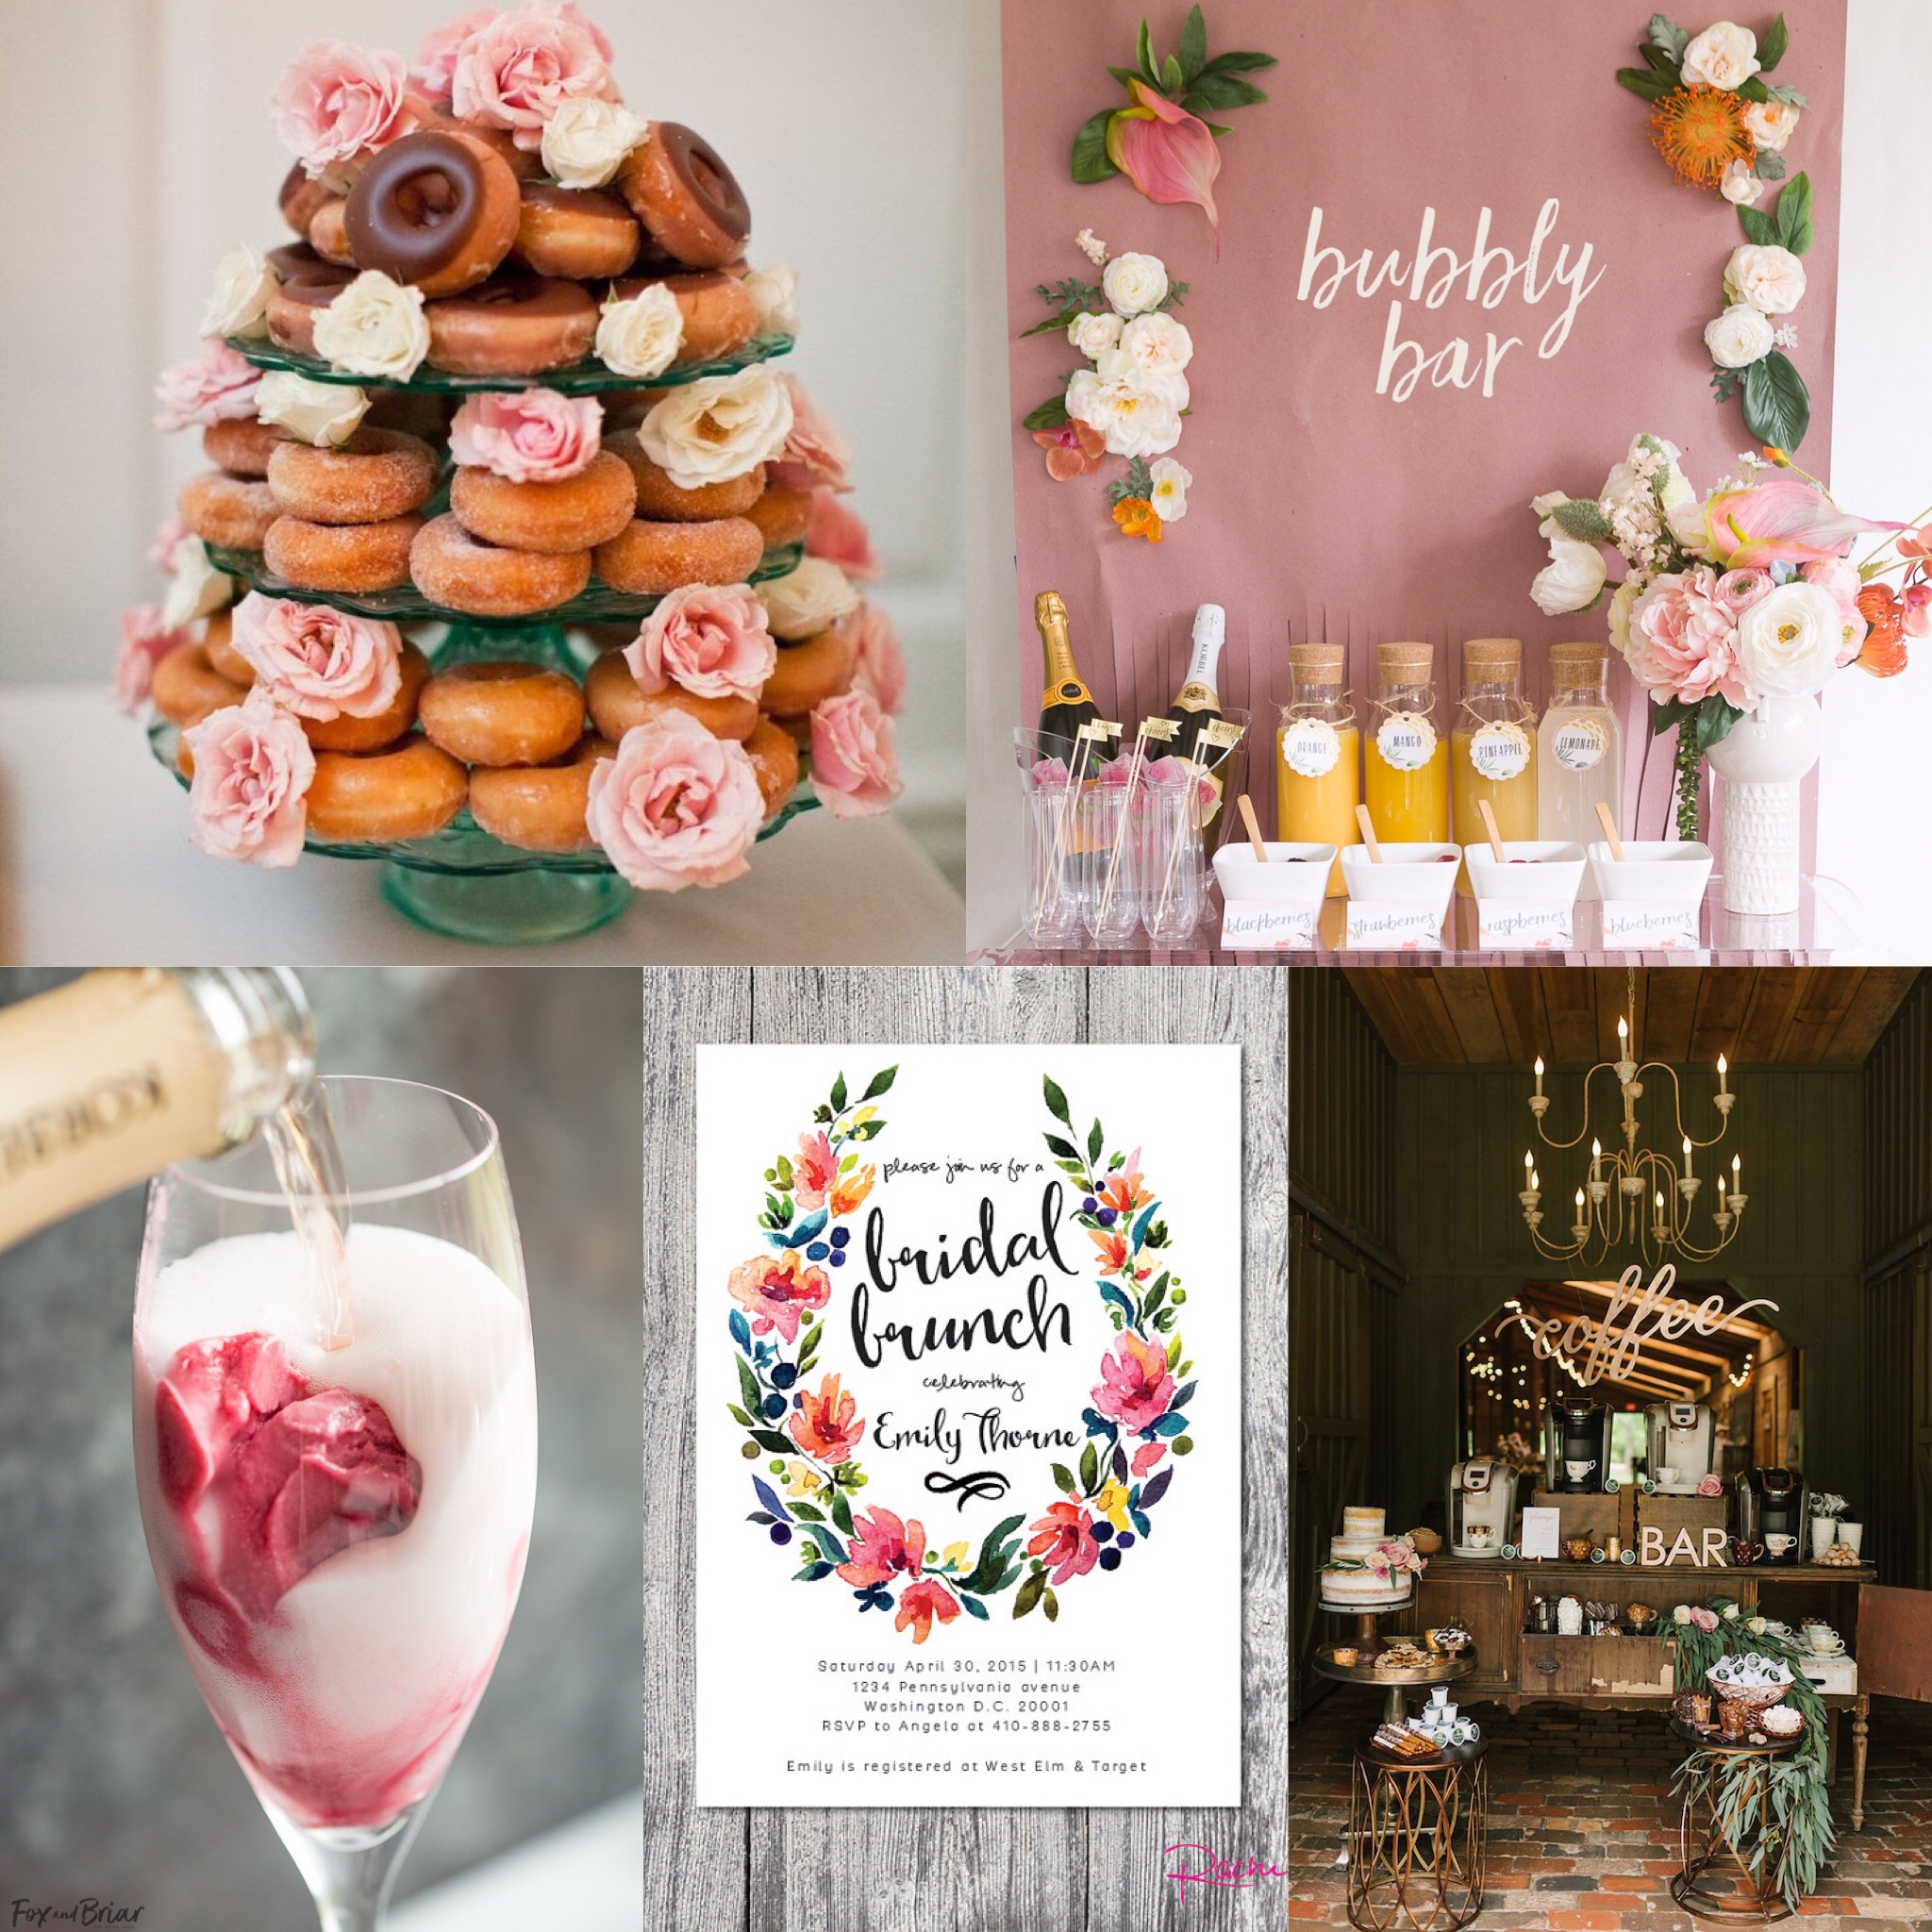 Country Chic Bridal Shower - Bridal Shower Ideas - Themes